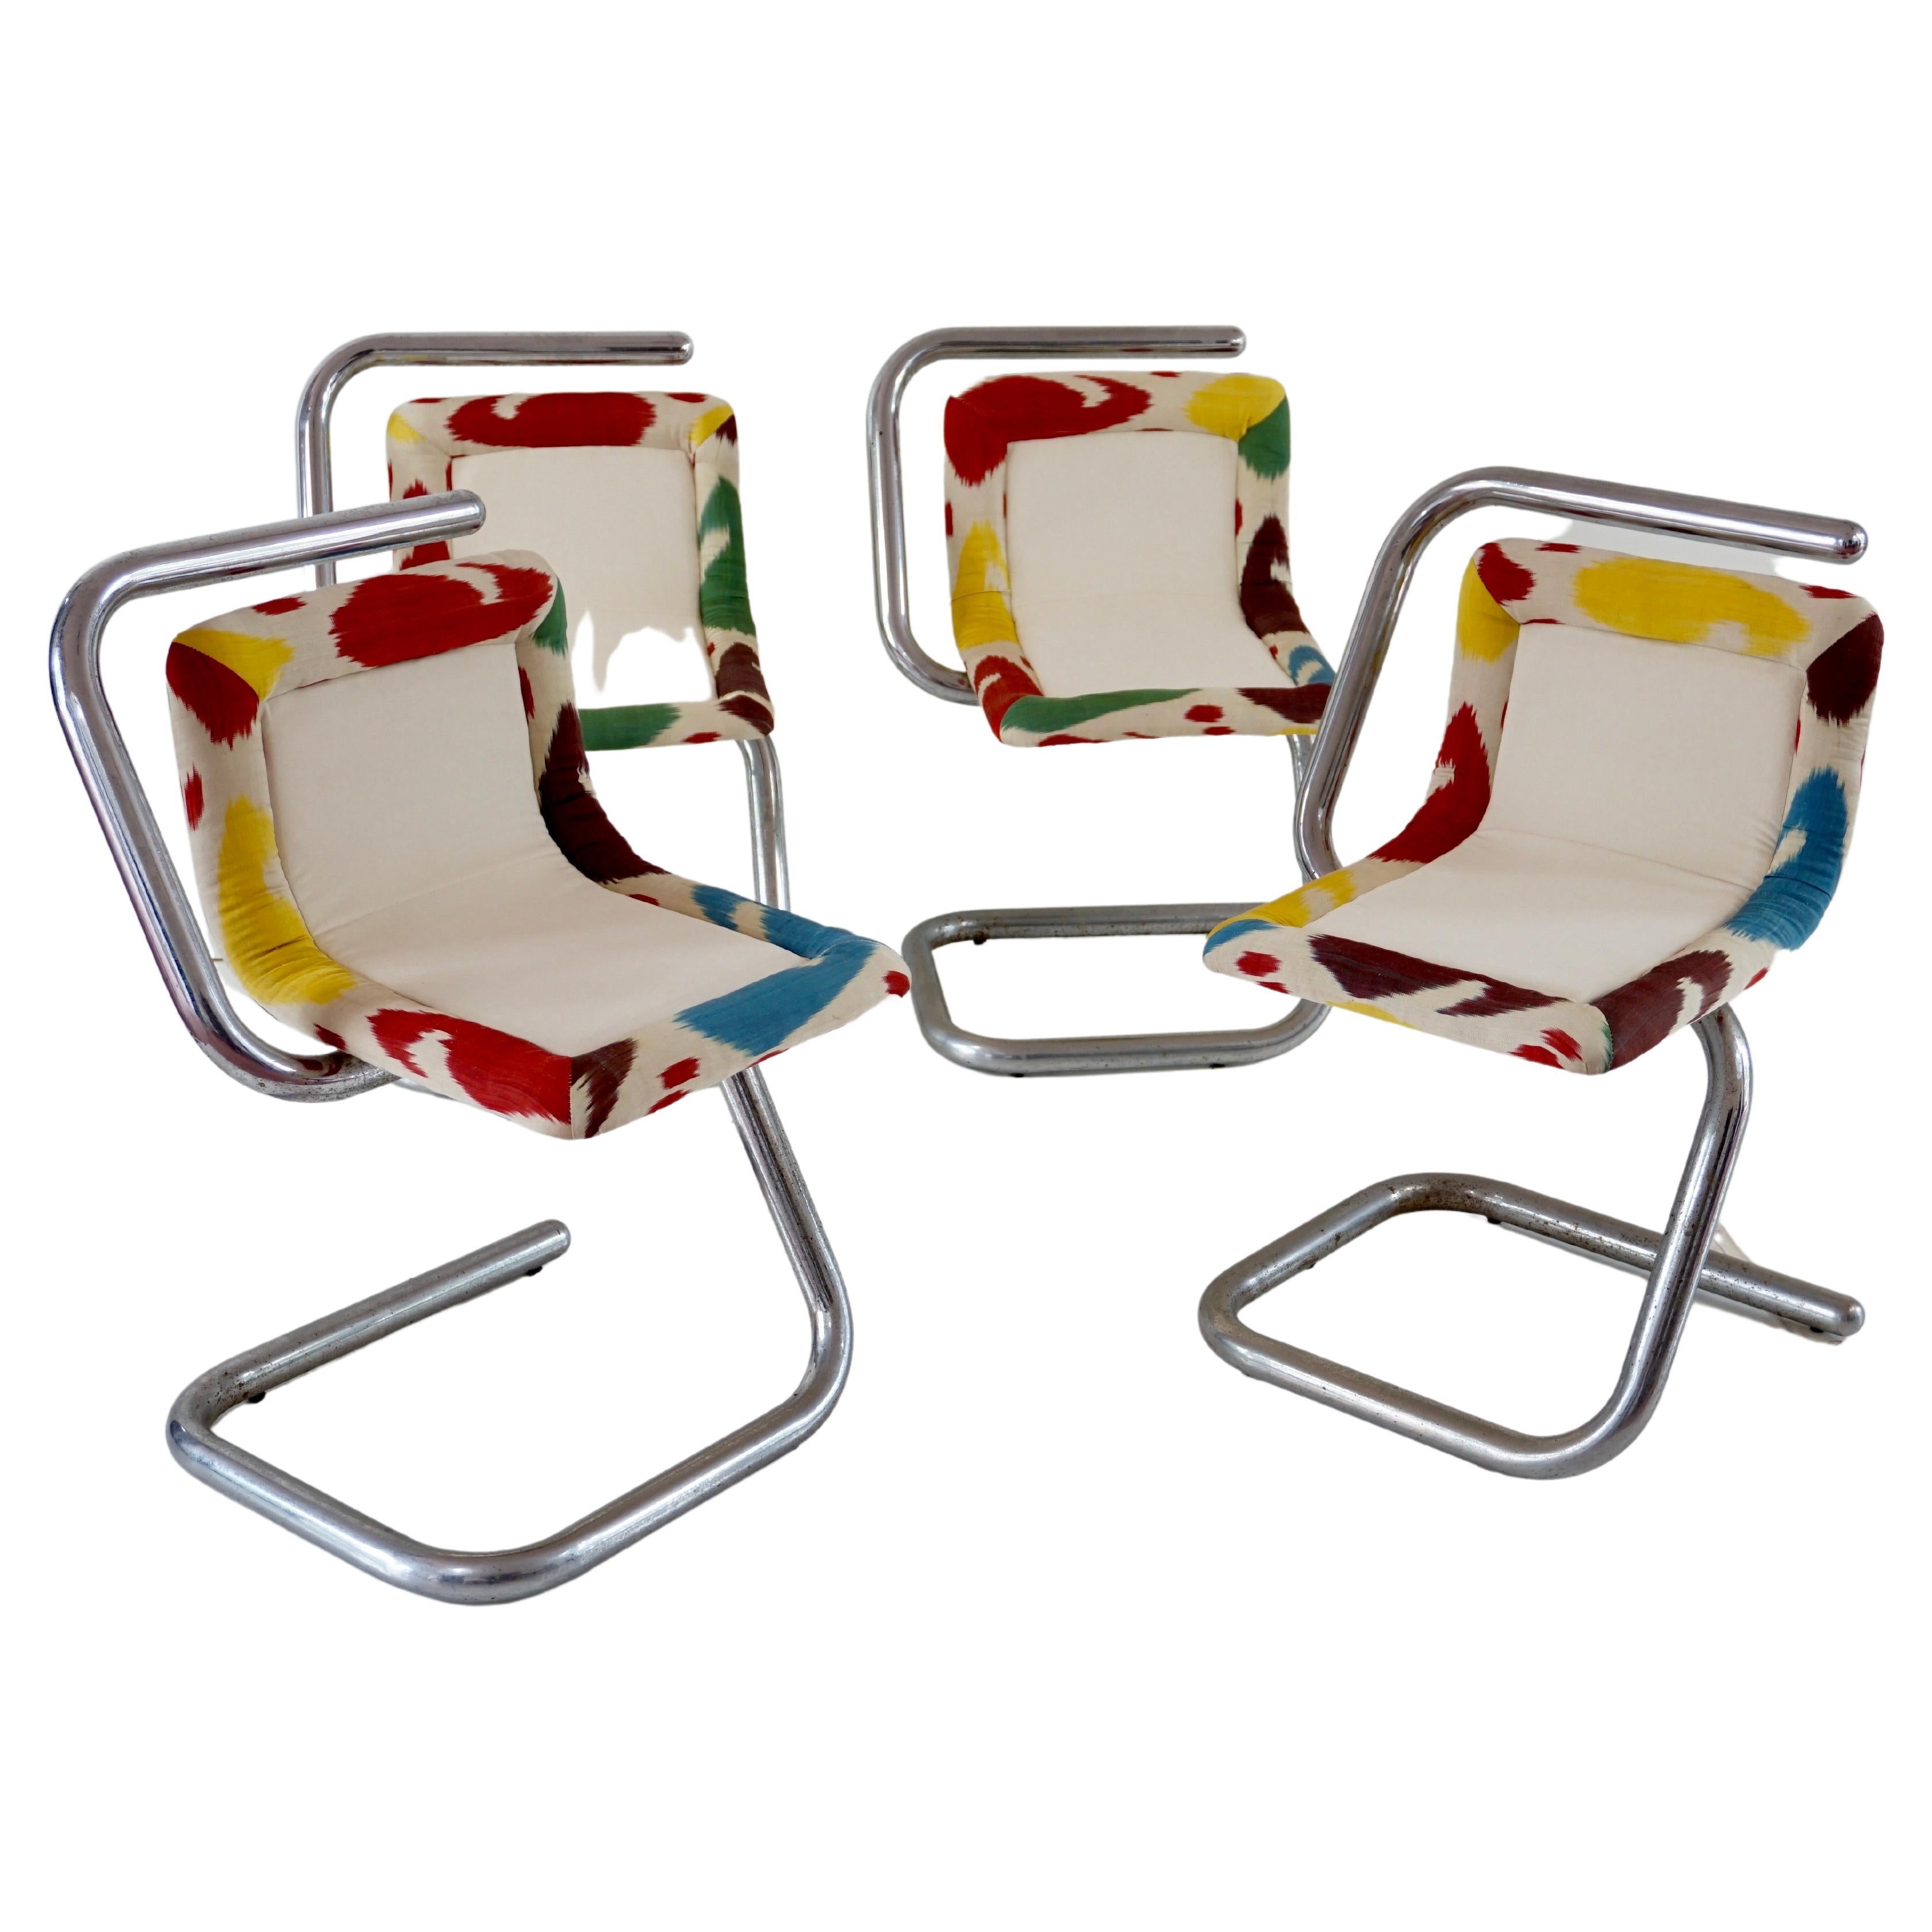 Set of Four Tubular Chrome Chairs, Velvet and Ikat, 1970 by Giotto Stoppino For Sale